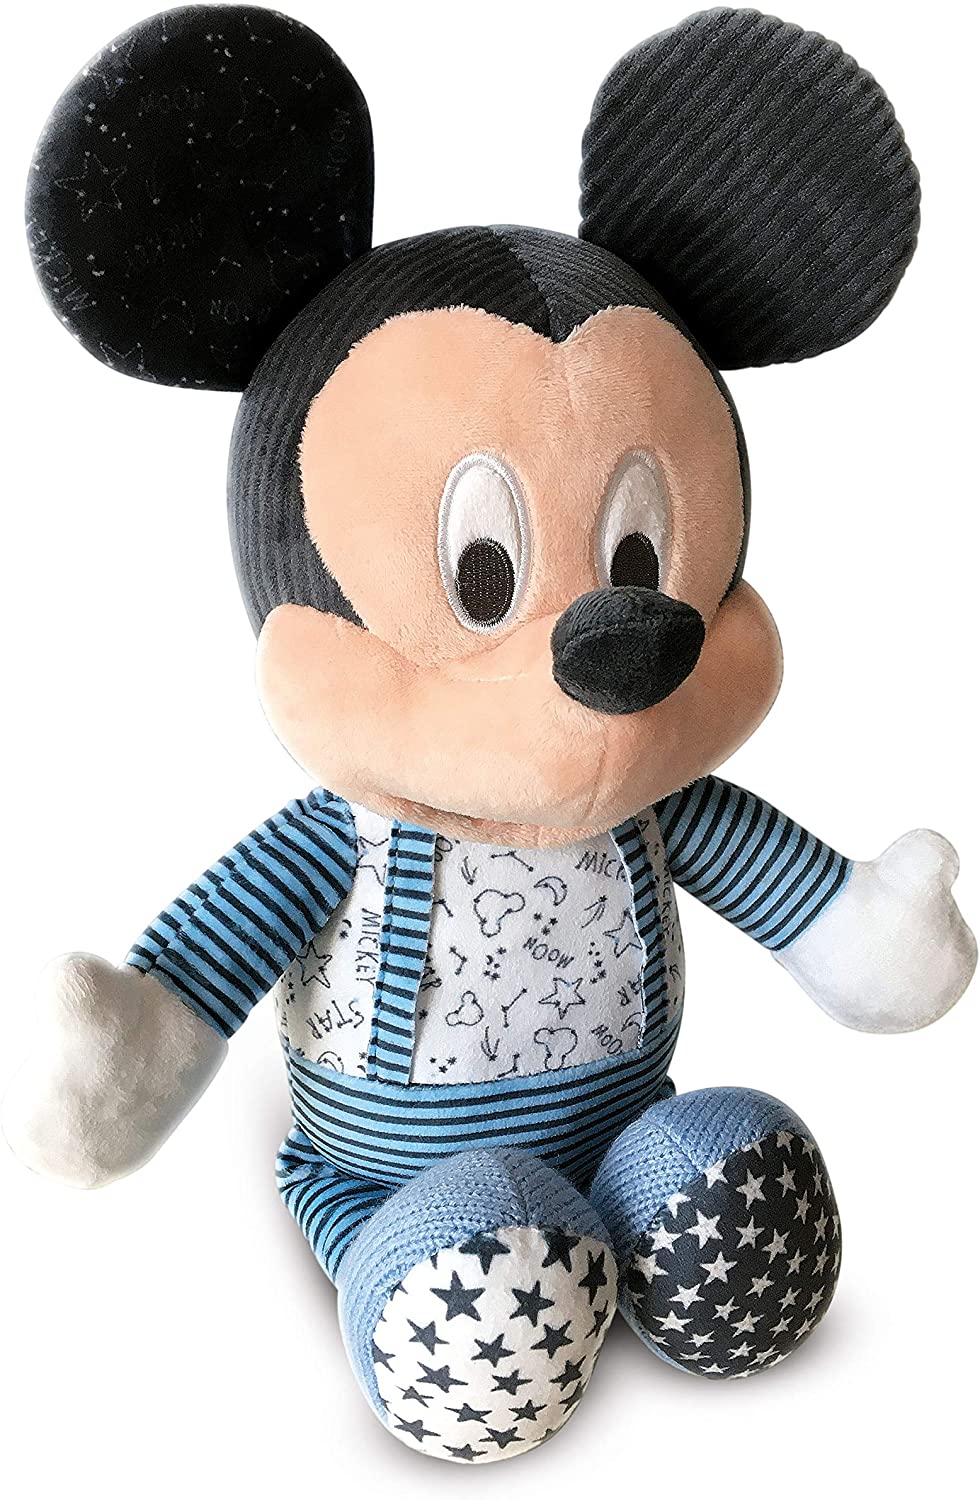 Clementoni, 17394, Disney Baby Mickey Goodnight Plush, educational toy for toddl